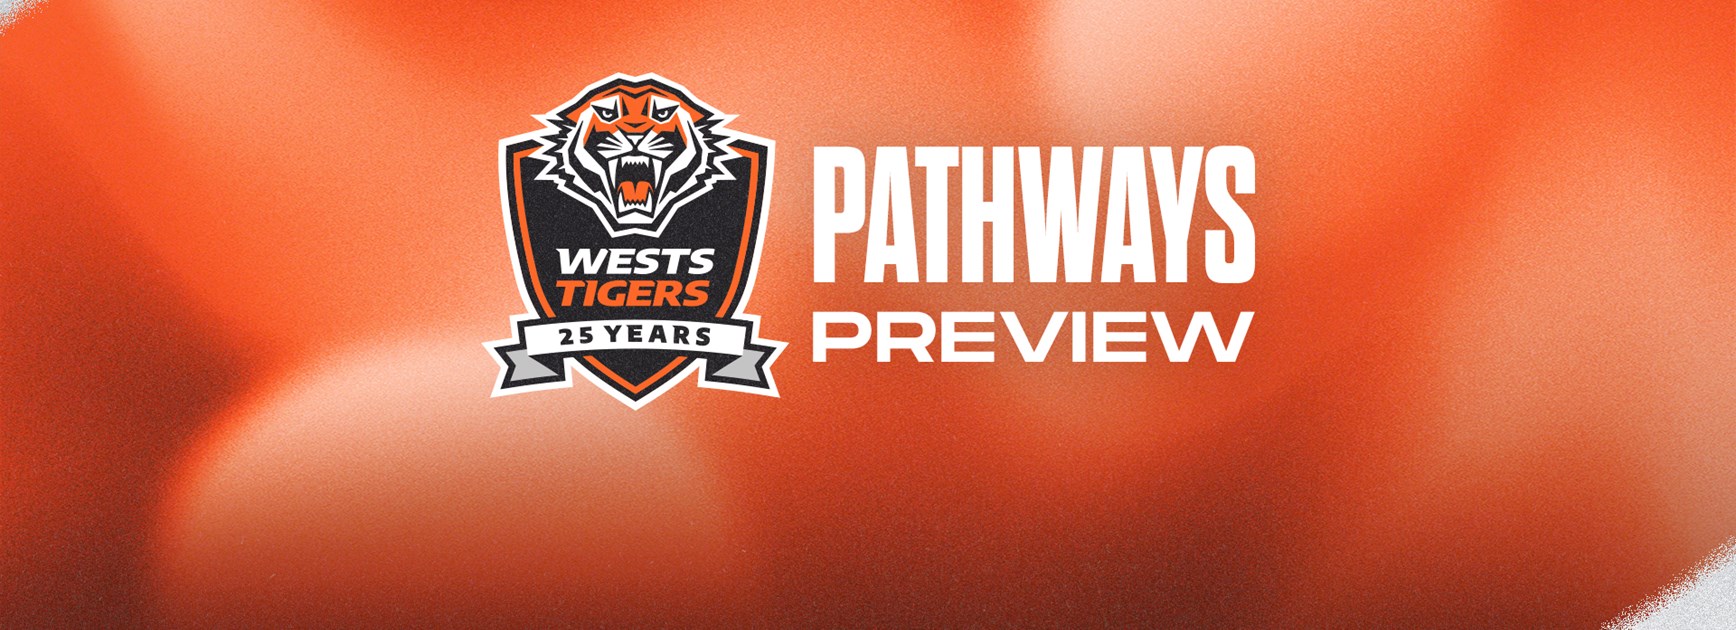 Pathways Preview: Round 8